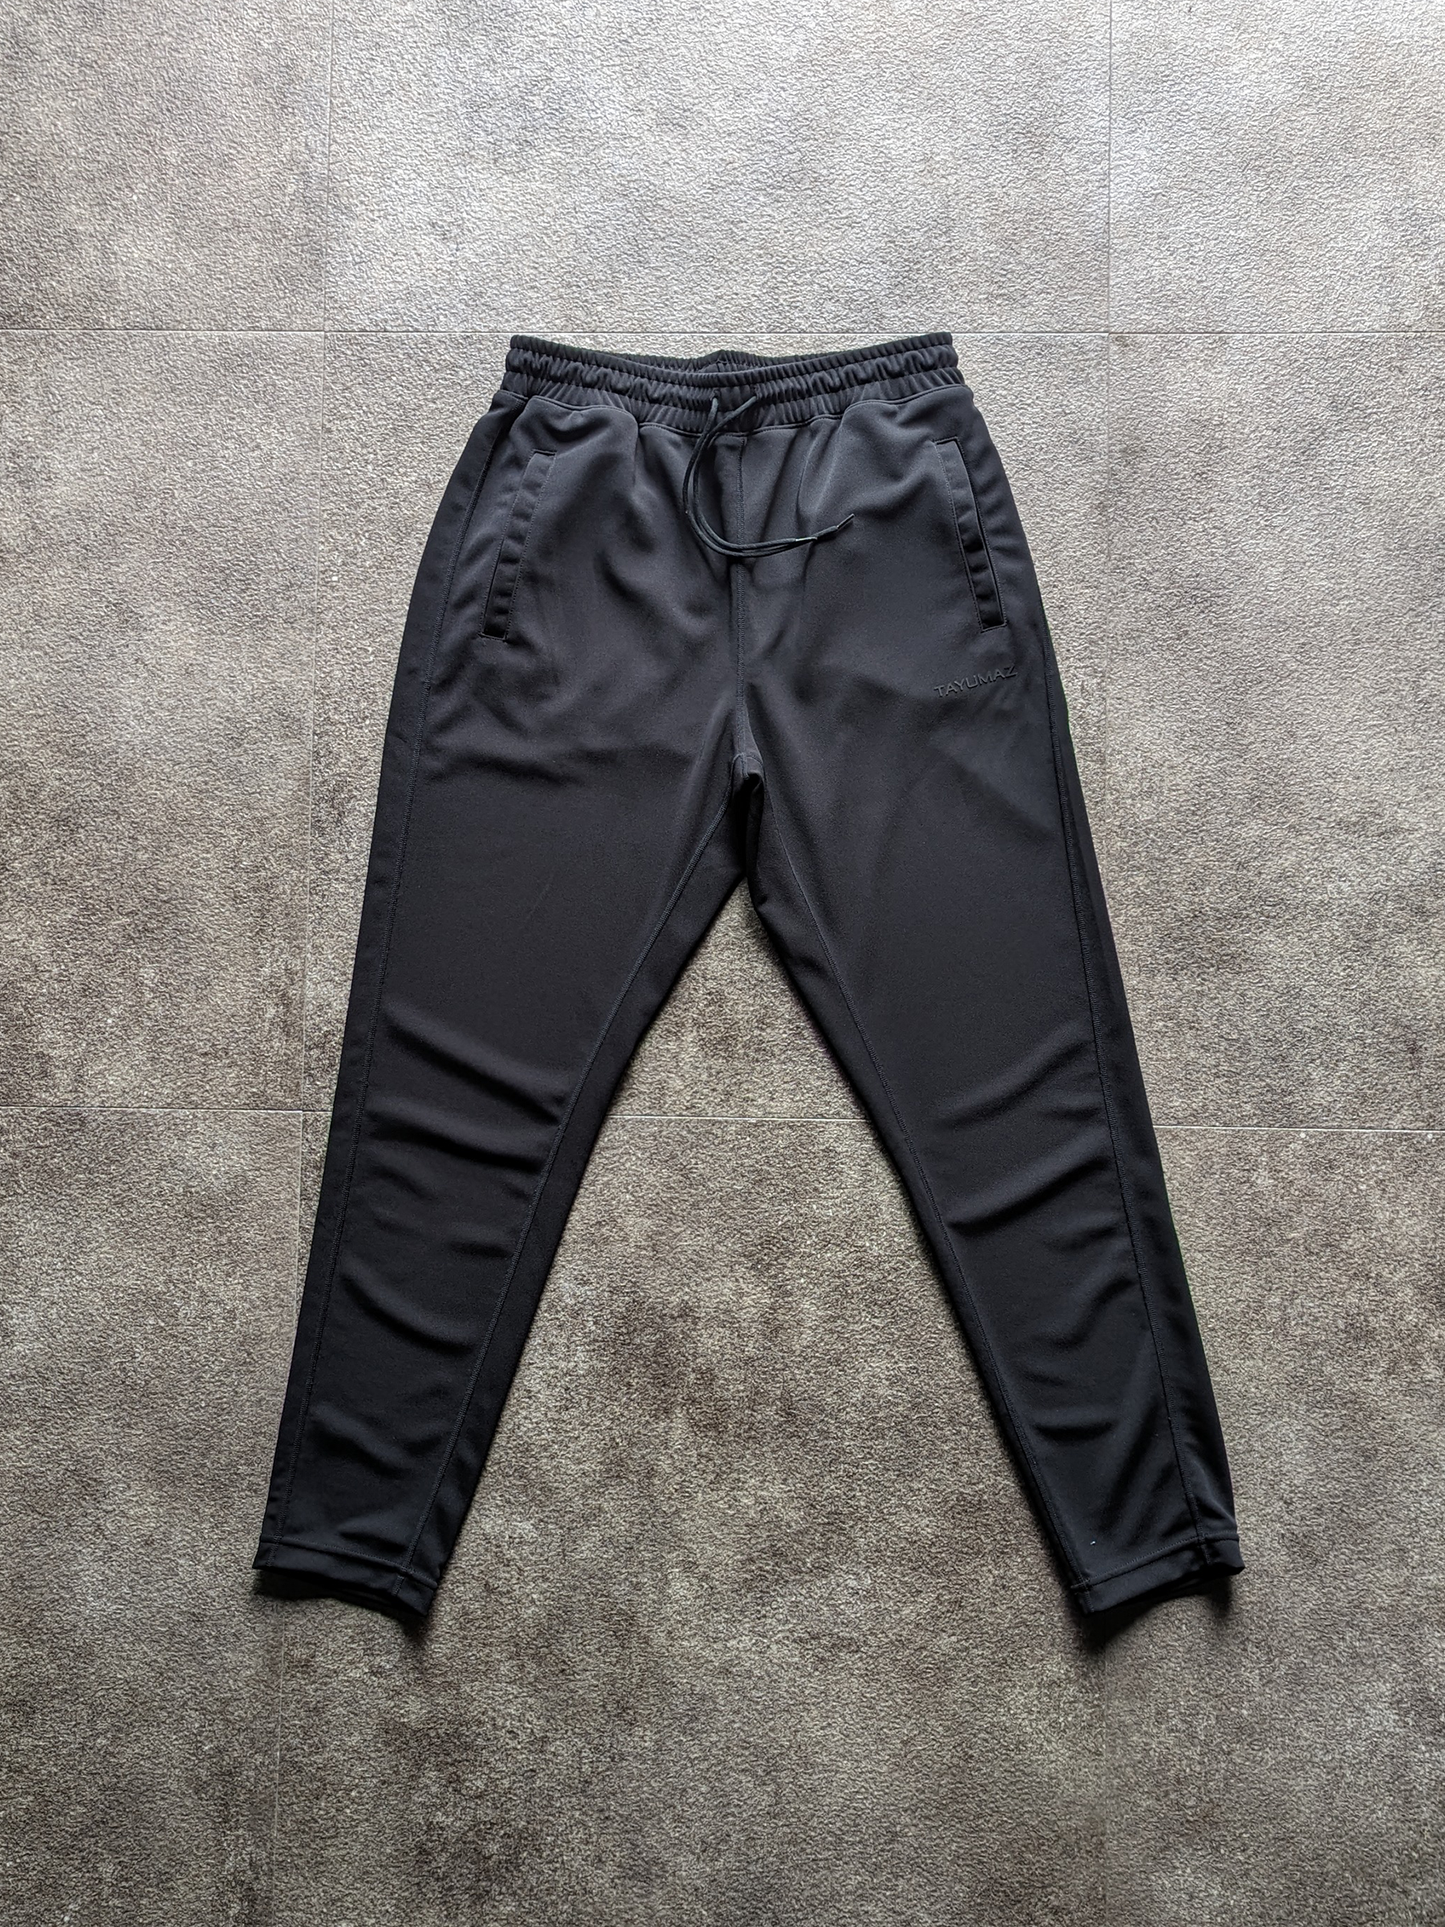 Dry Suiting Long Pants Black / 3D Silicone Logo Black